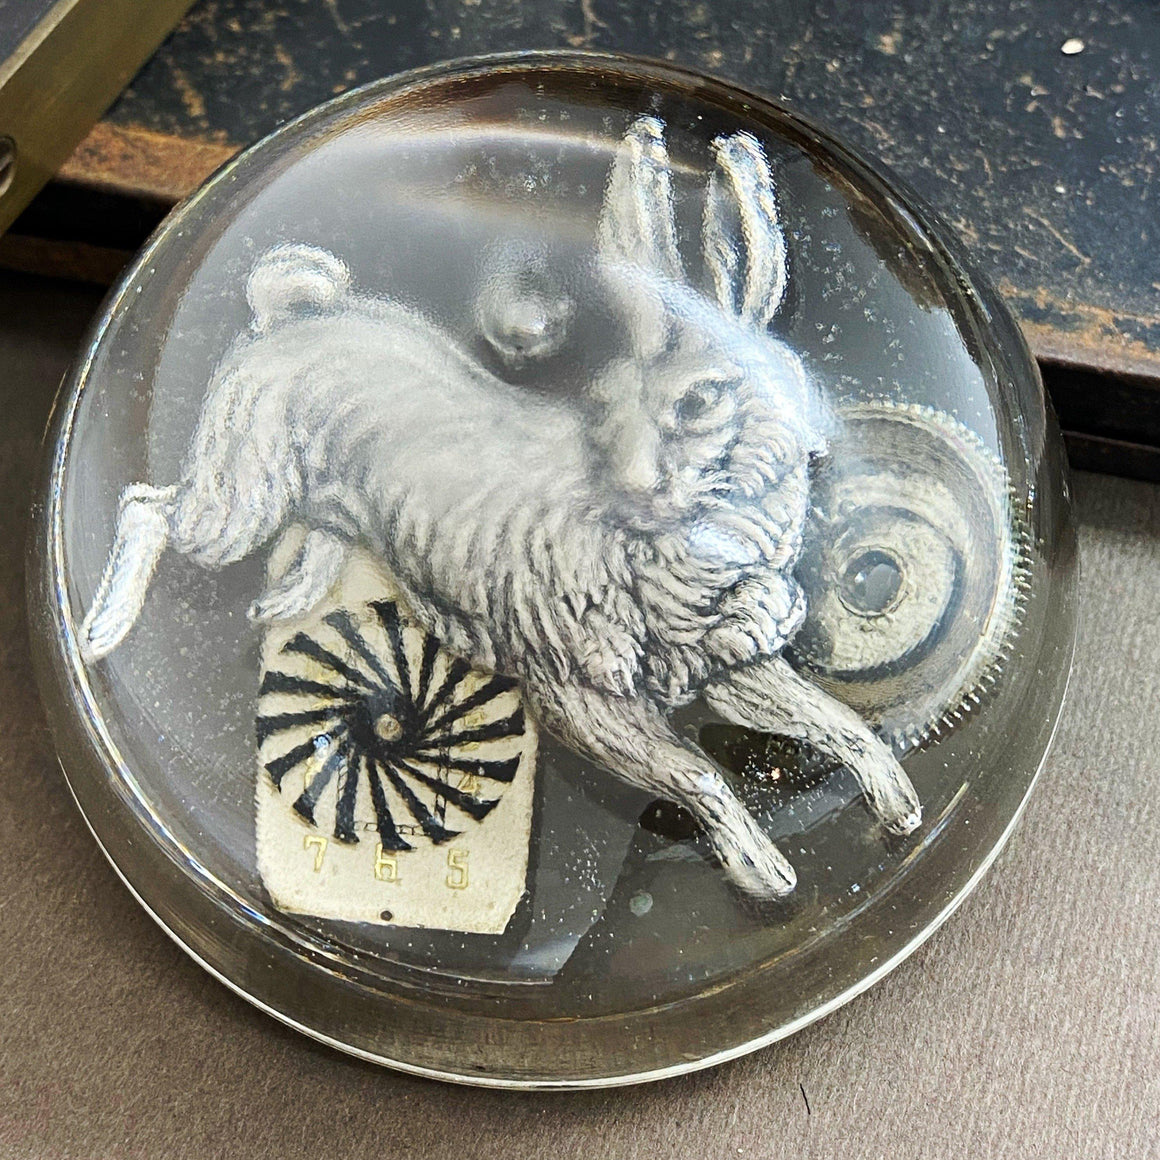 White Rabbit Paperweight - The Victorian Magpie